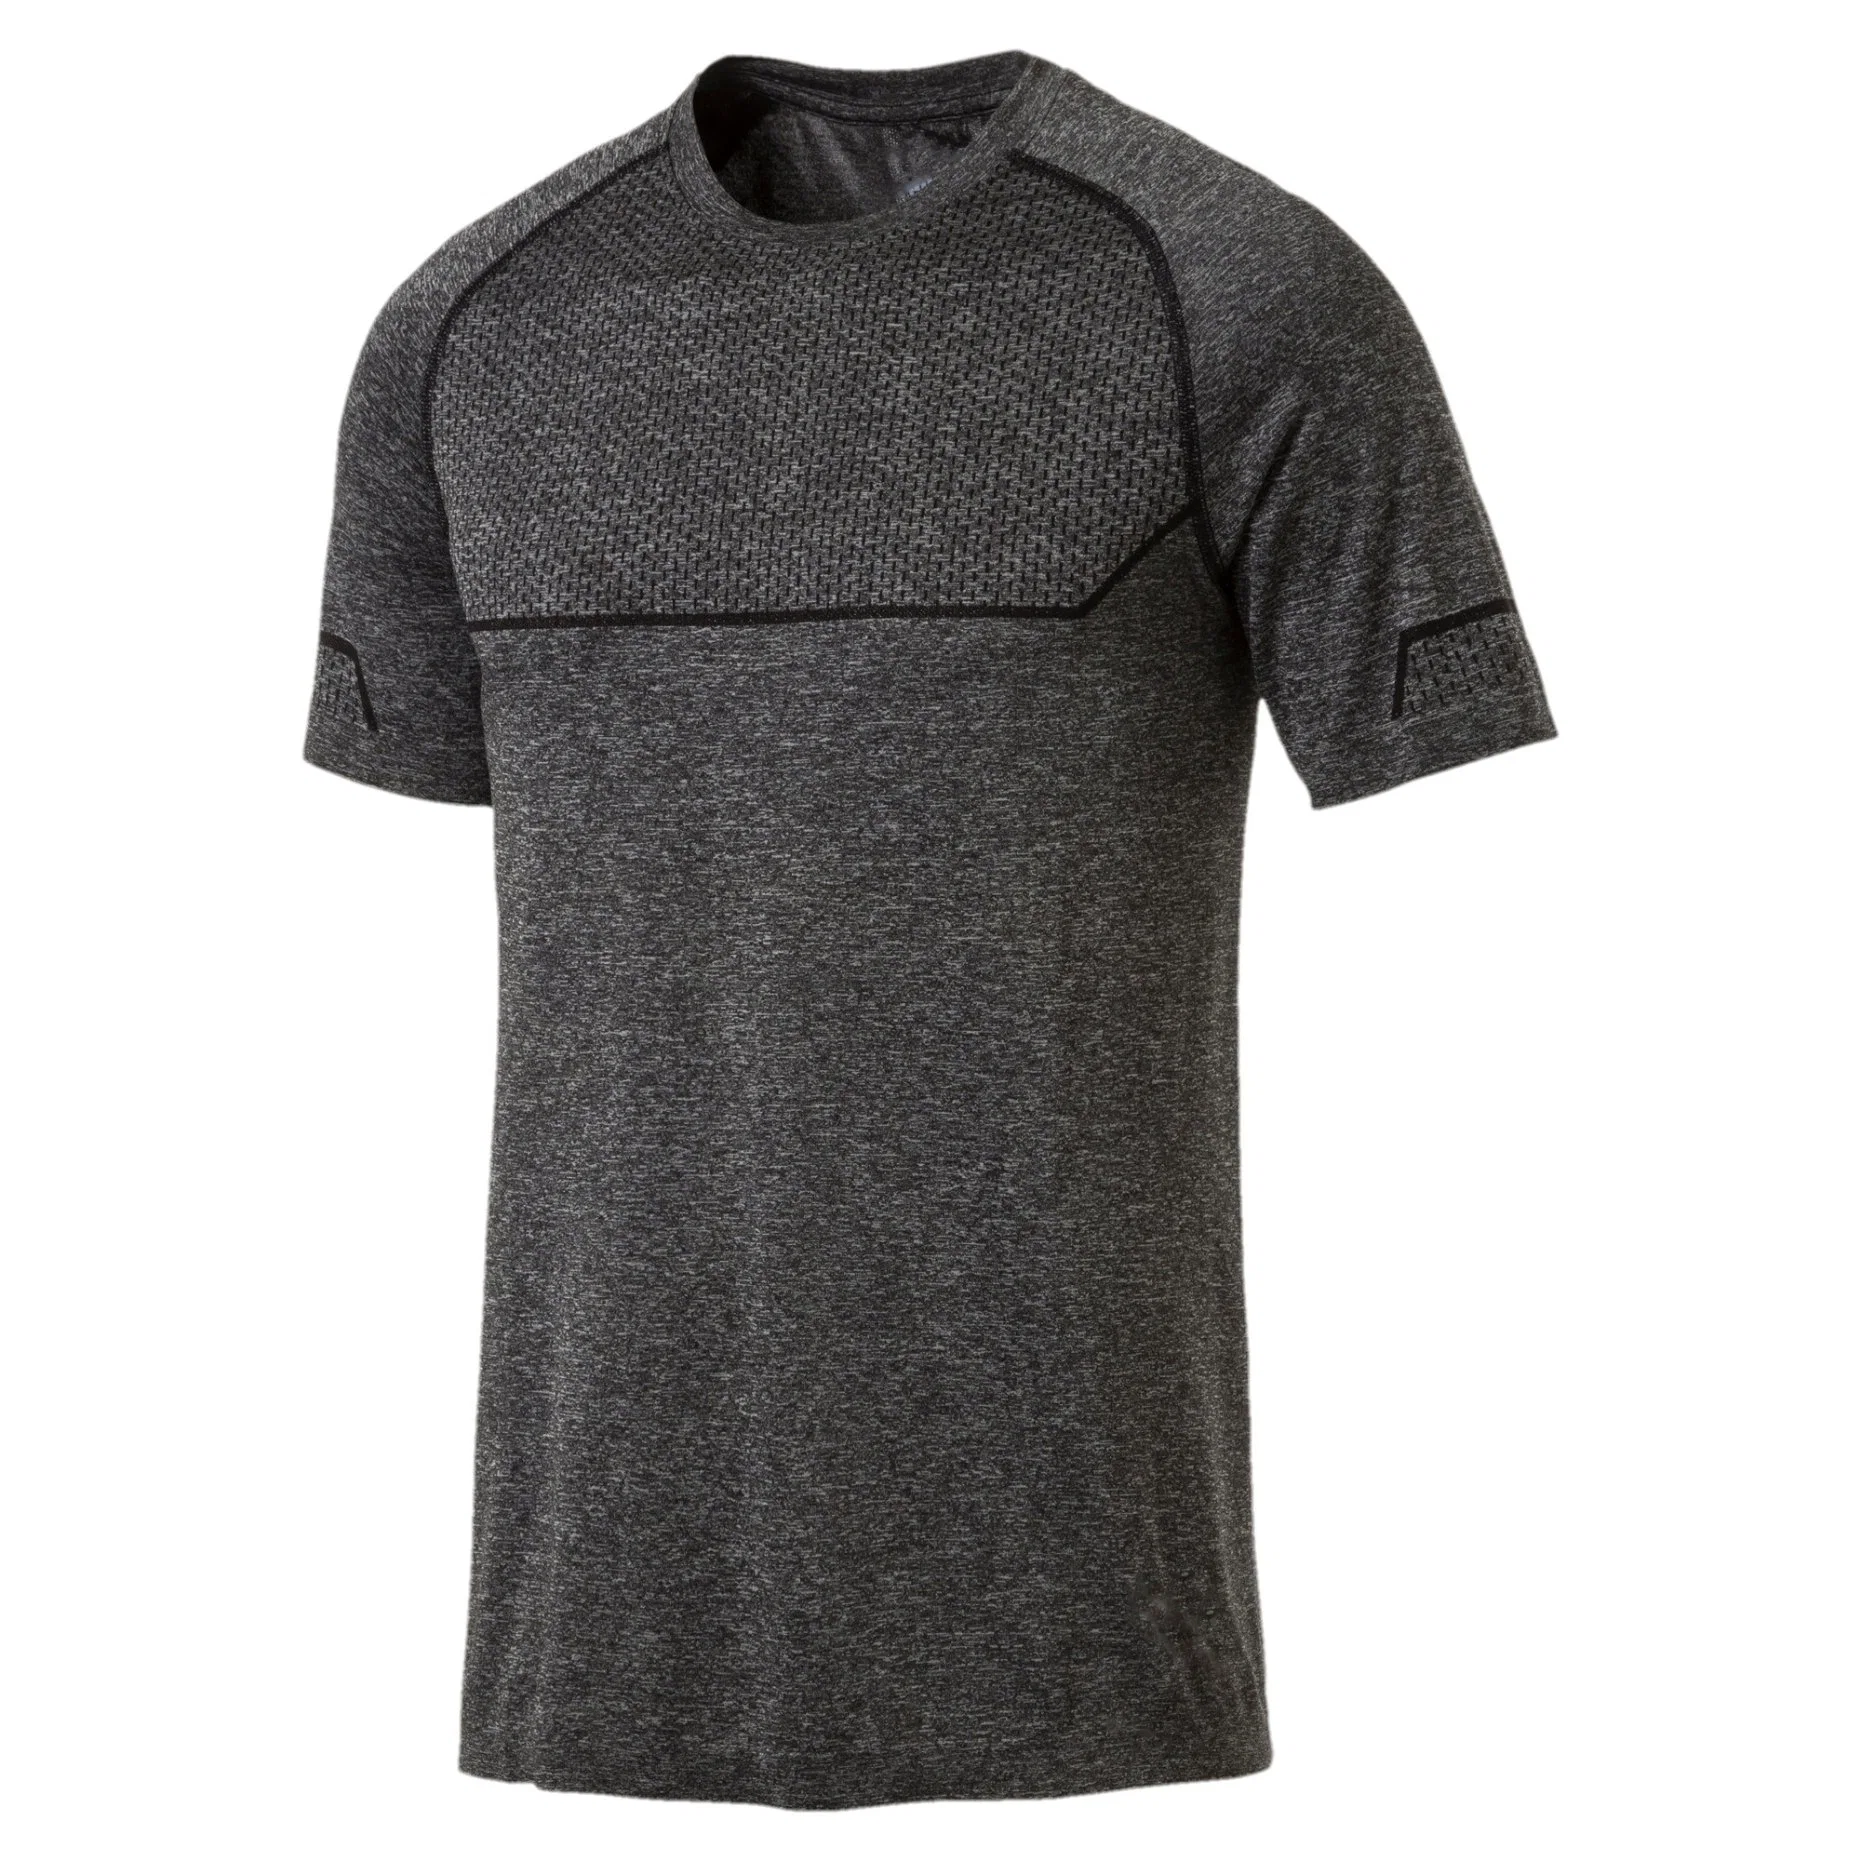 Men's Seamless Quick Dry Short Sleeve Top Energy Training Tee Athlet Running Gym Sports Wear